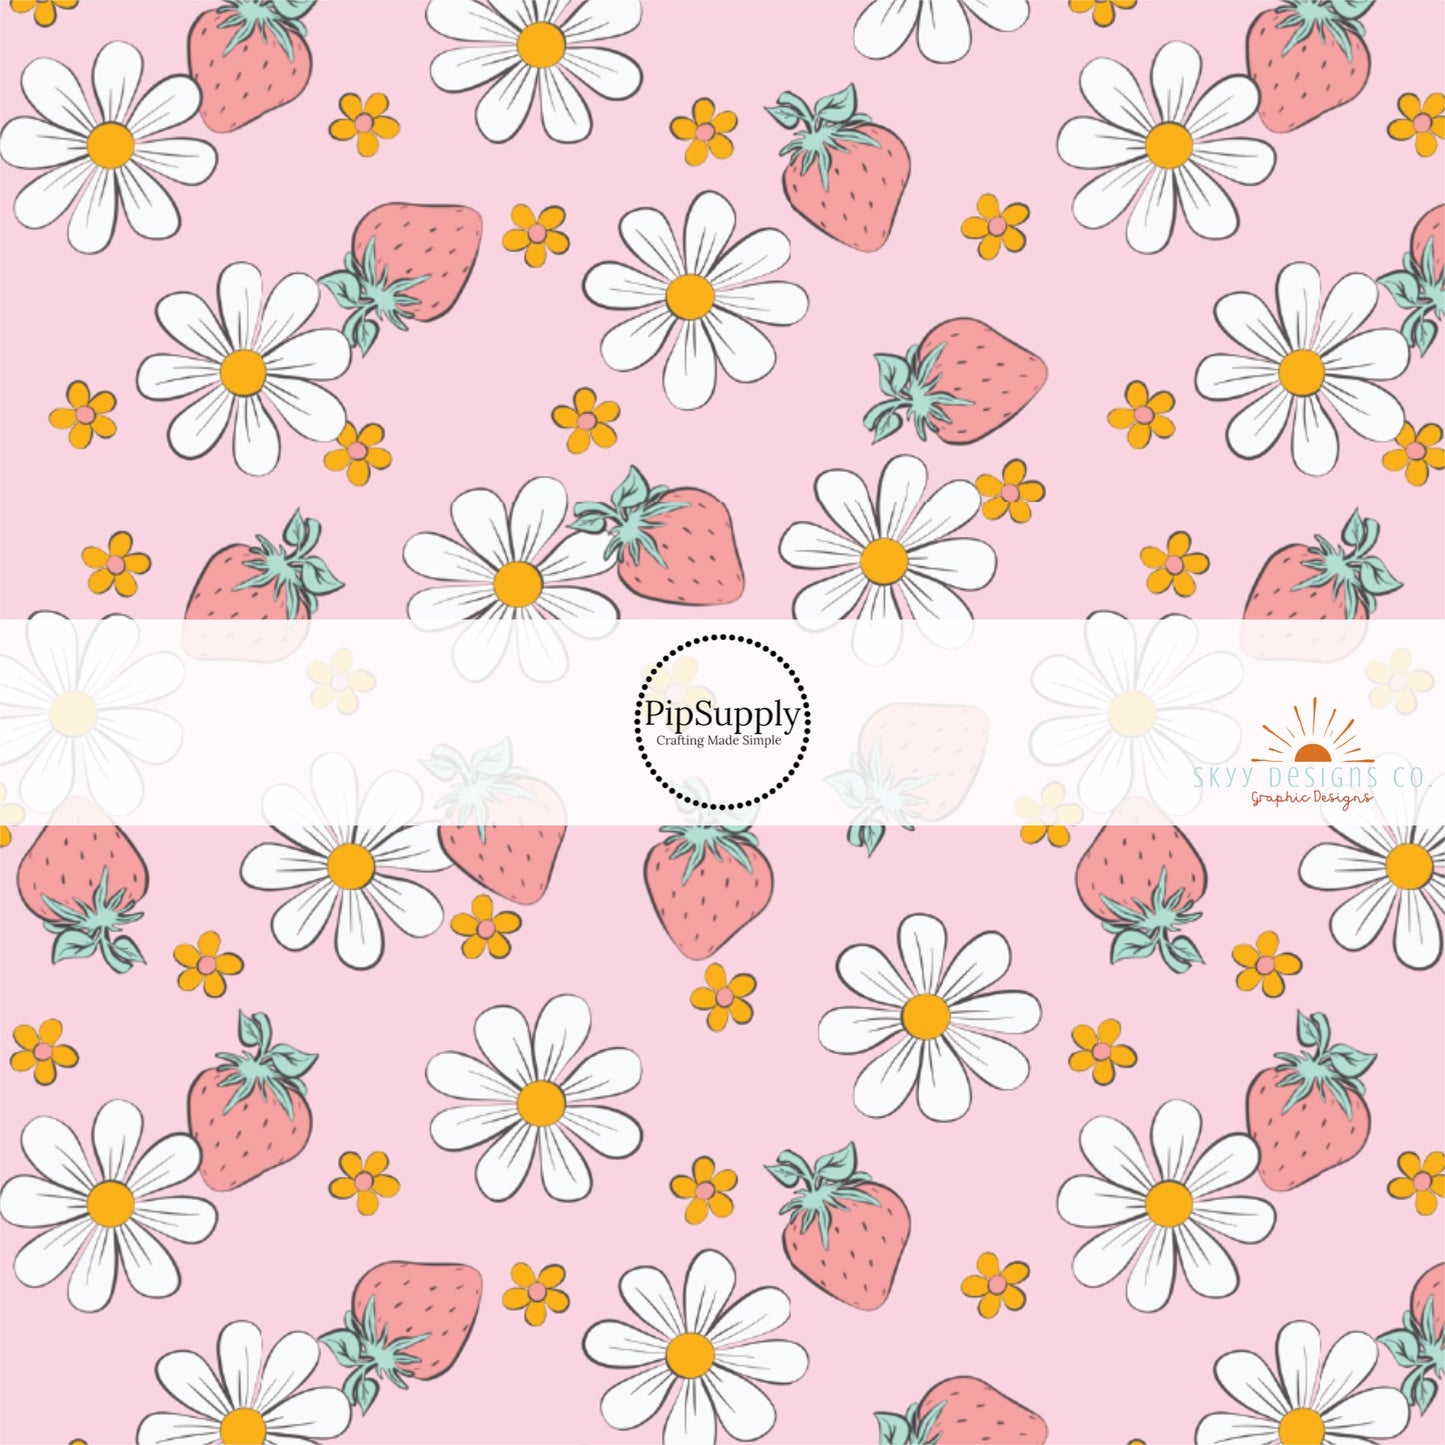 Pastel orange flowers, white daisies and pastel strawberries on pink hair bow strips.